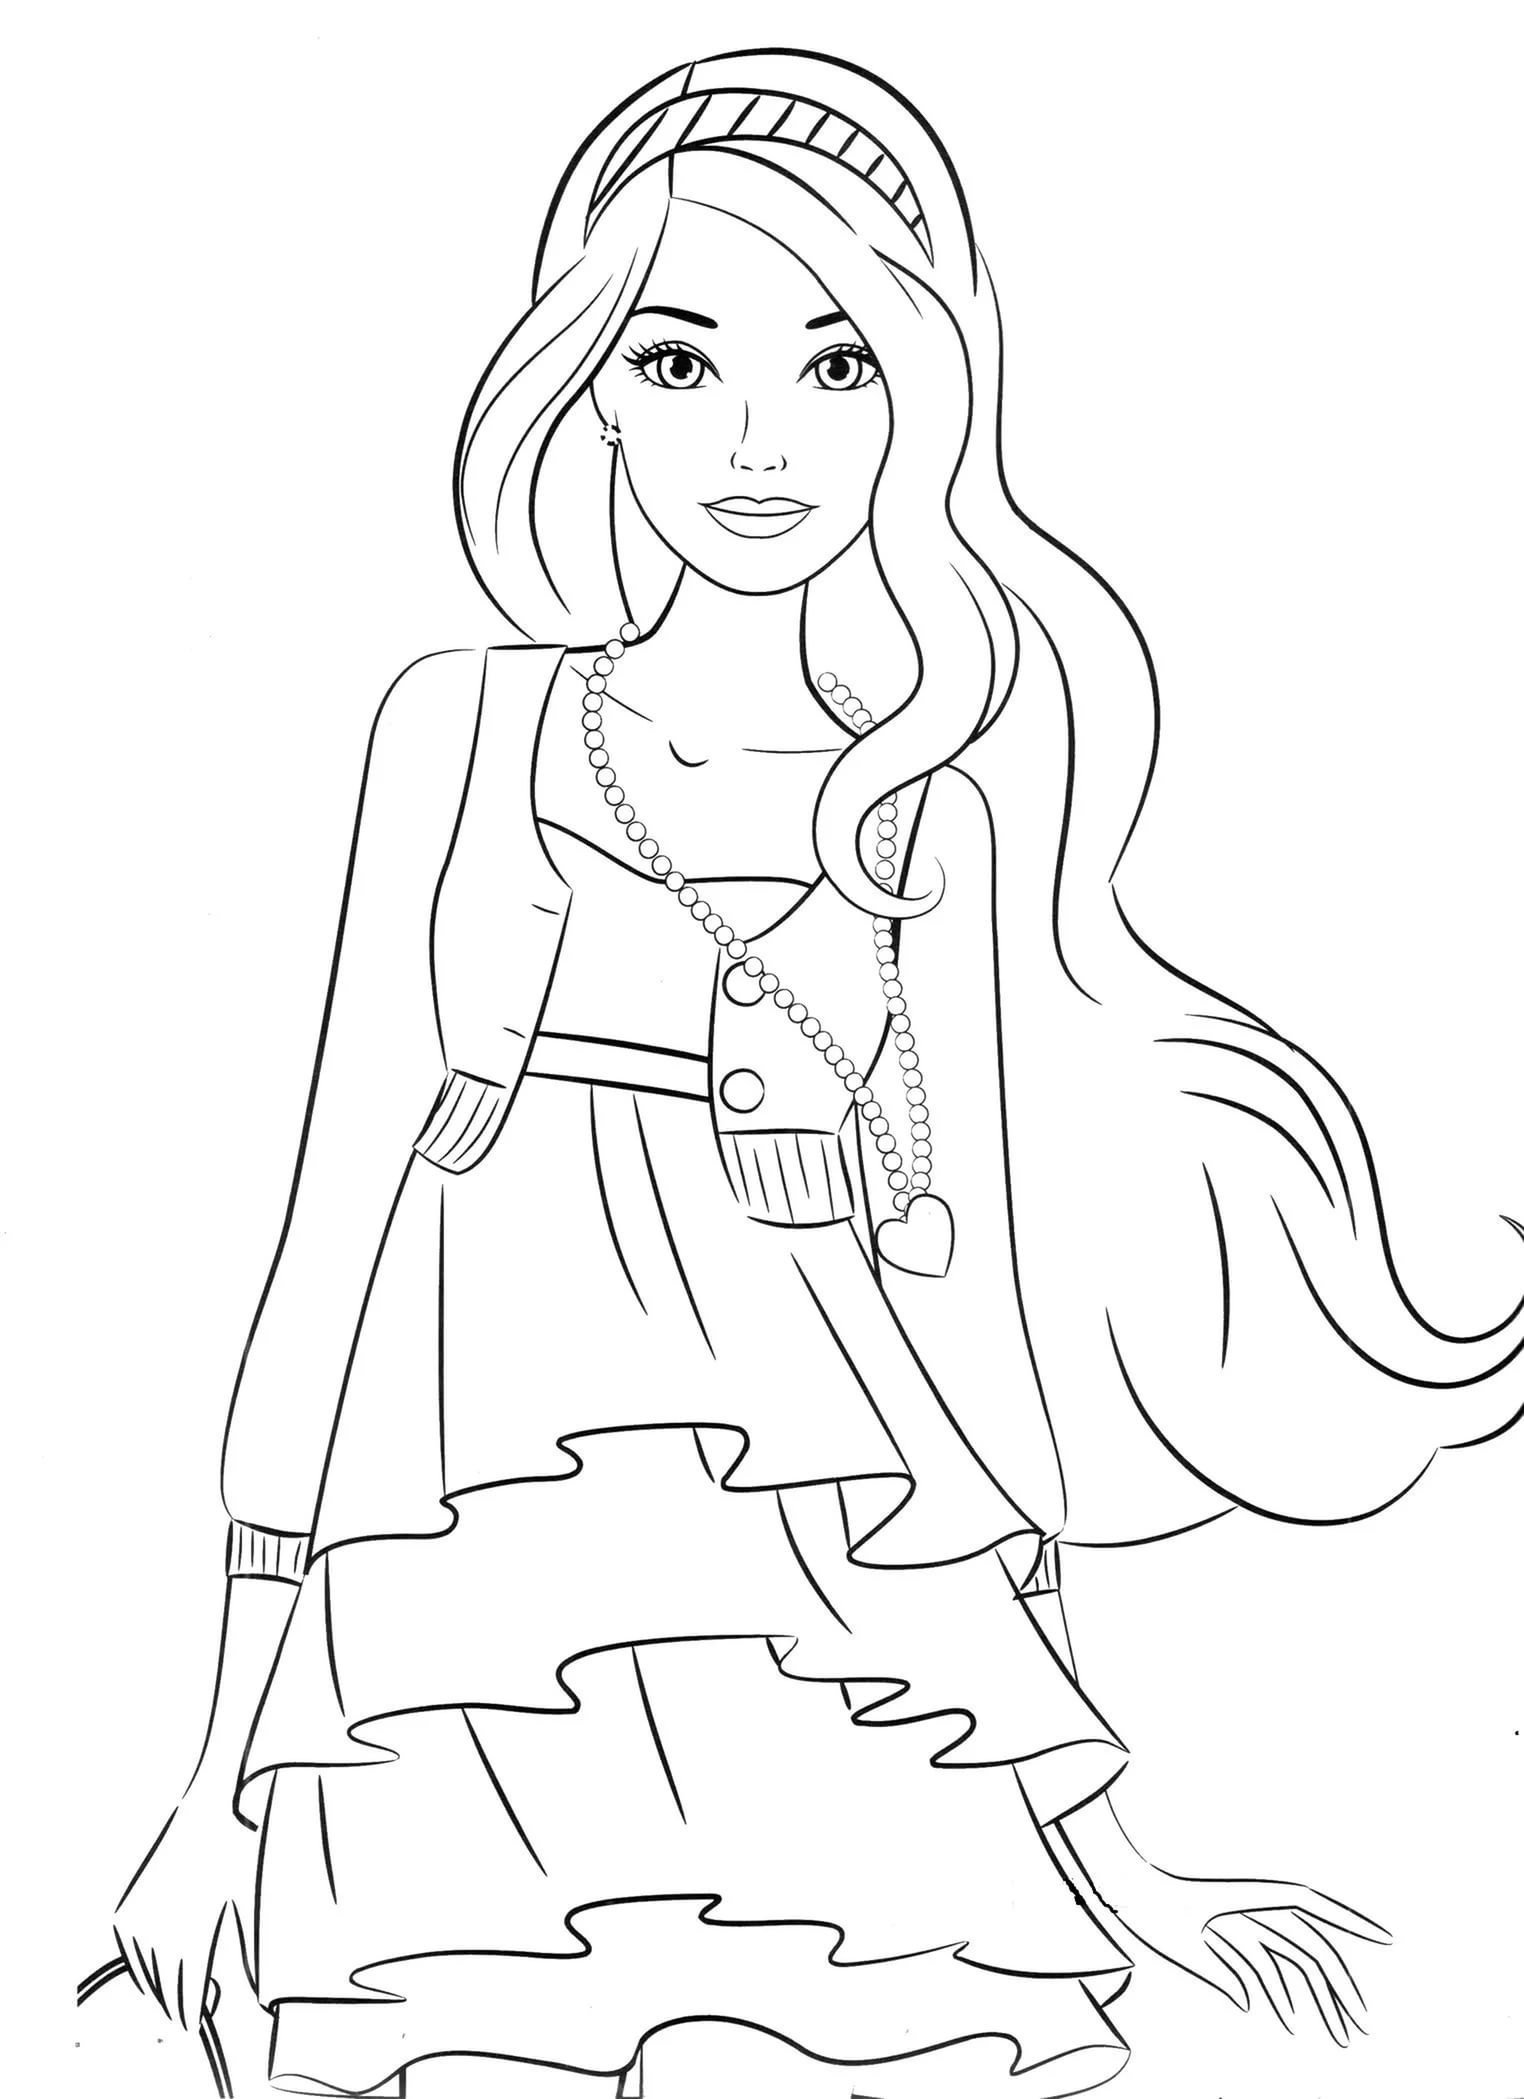 Coloring Sheet For Girls
 Coloring pages for 8 9 10 year old girls to and